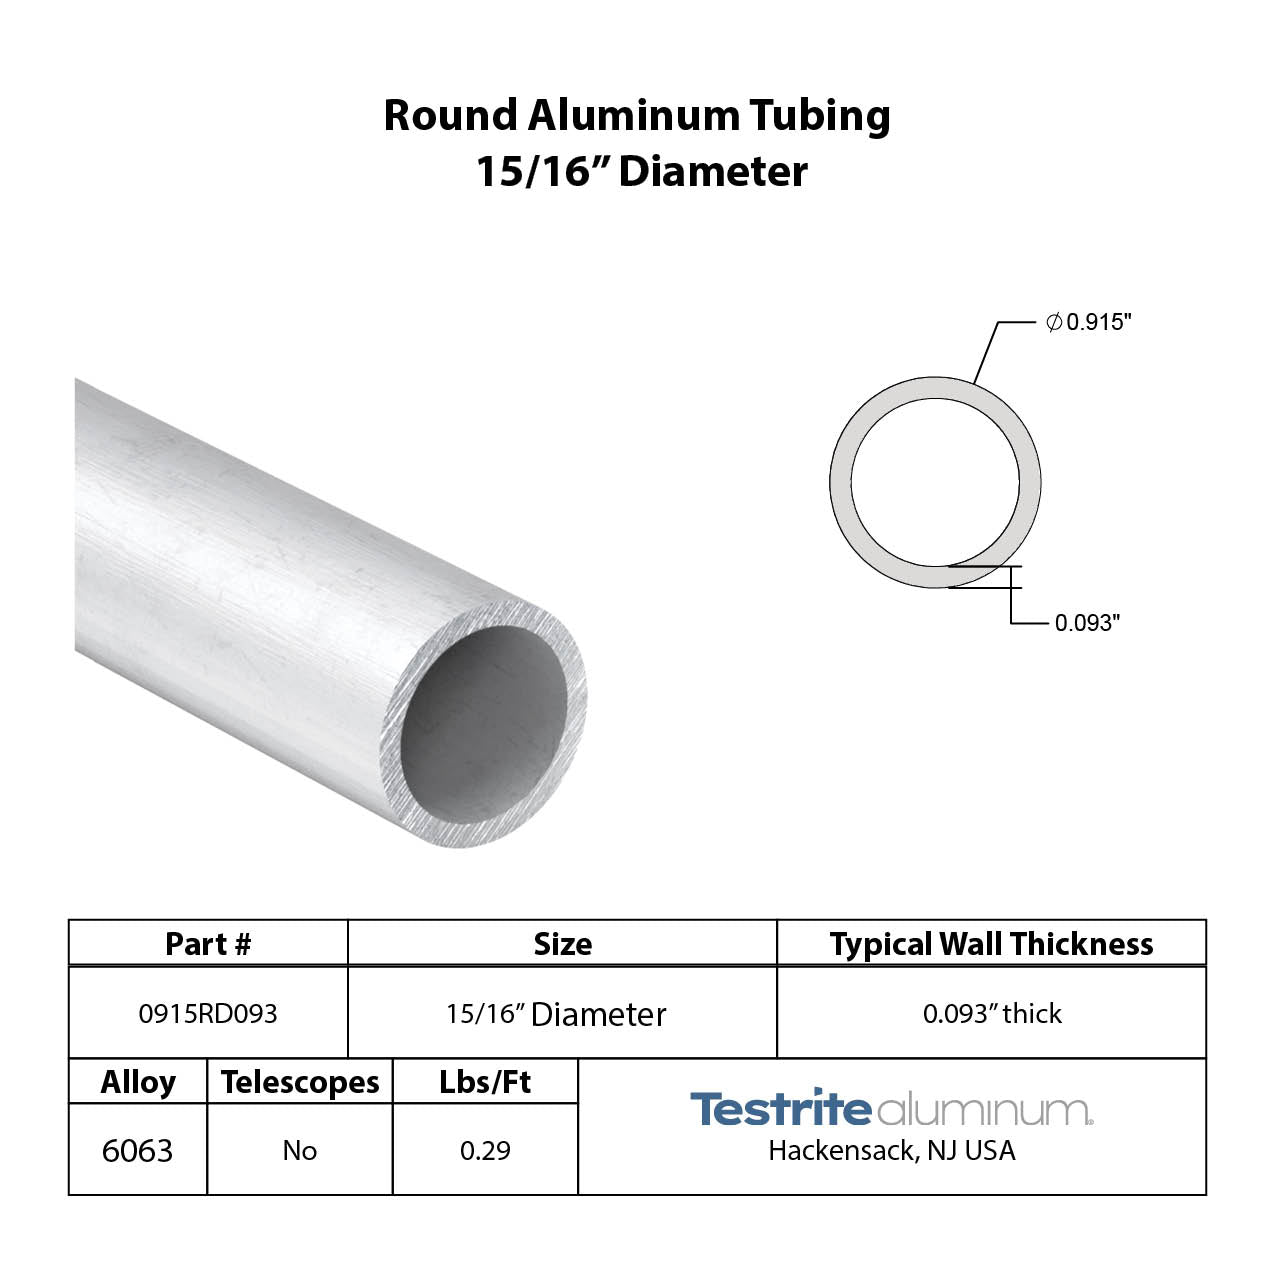 Spec sheet for approximately 0.915" x .093" Aluminum Round Tube, approximately round aluminum 15/16" Diameter x 3/32" Wall spec card includes lbs per ft, aka 29/32" diameter